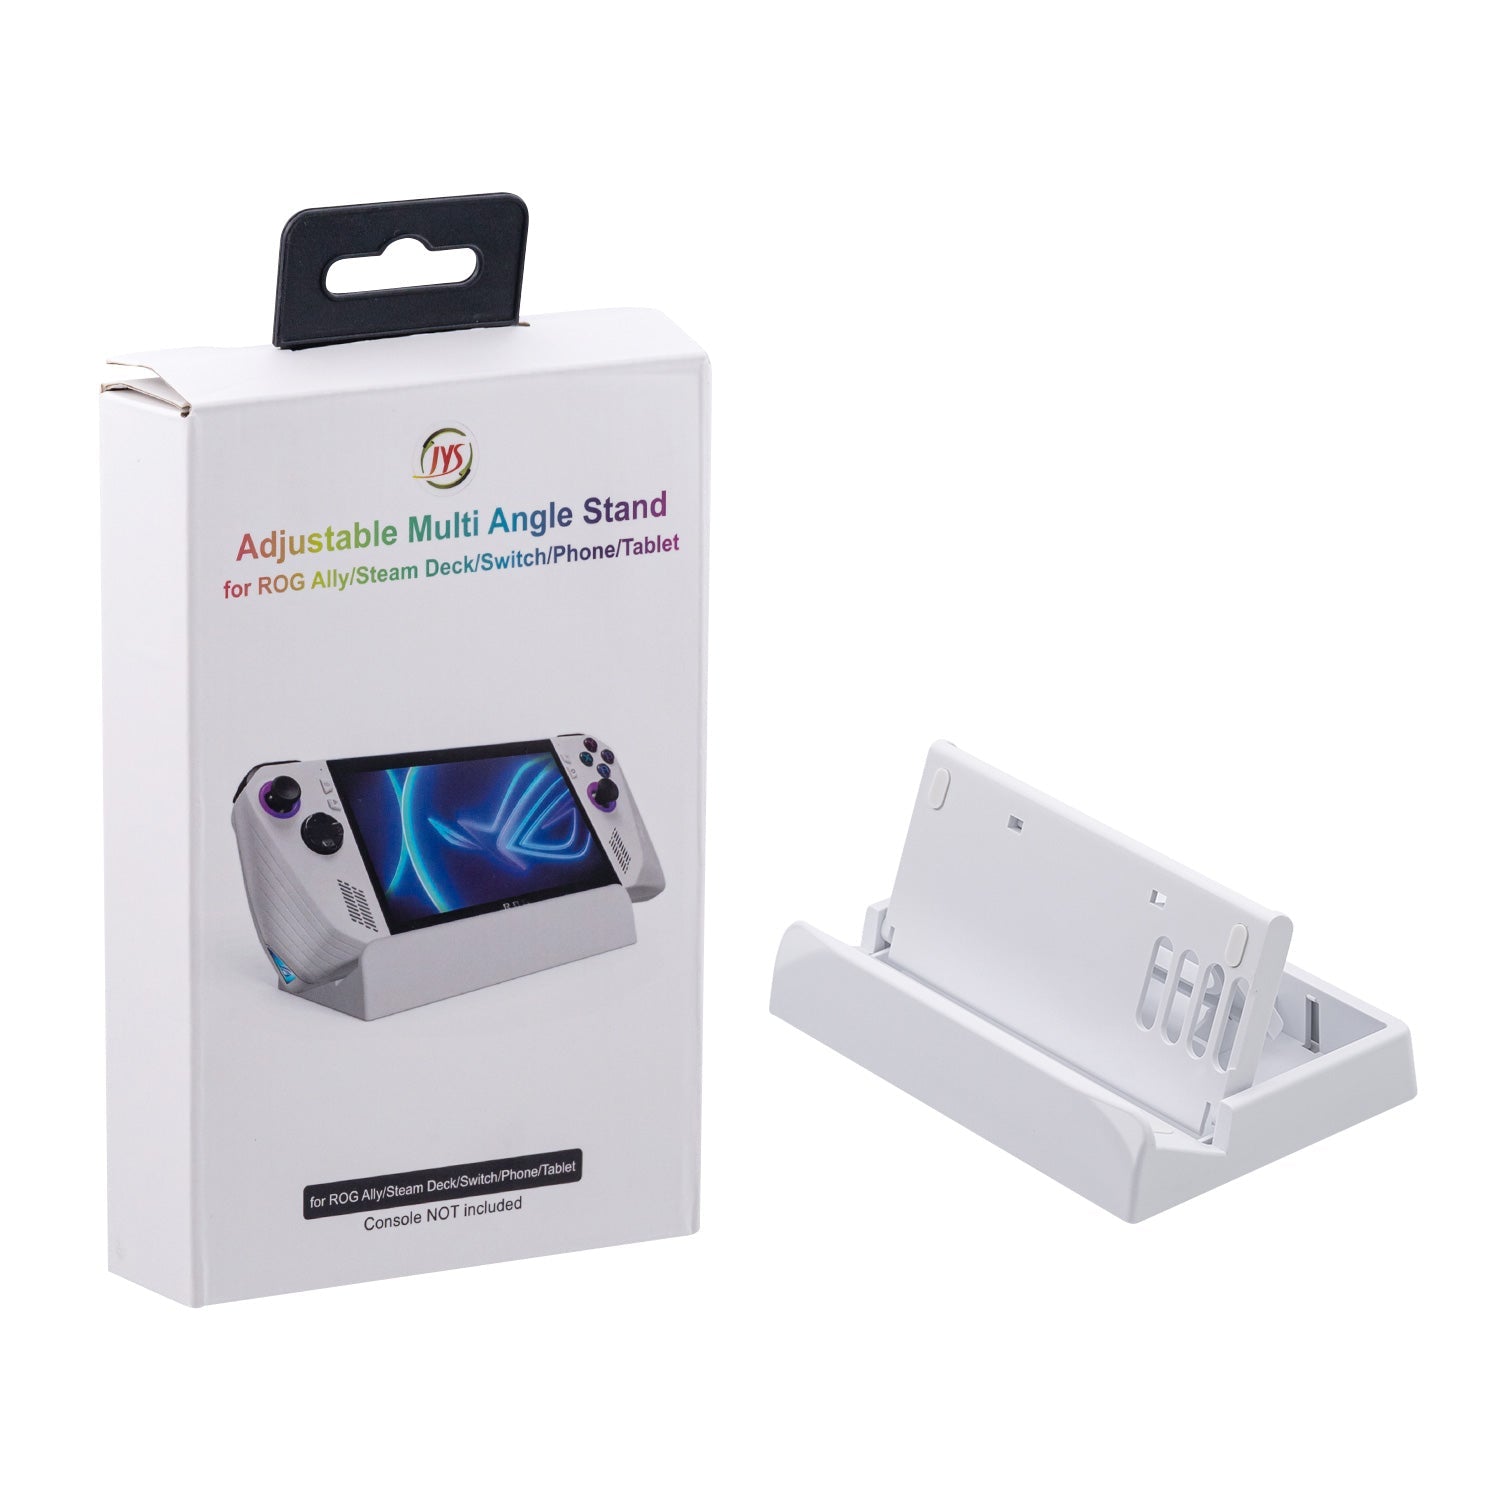 Gaming-JYS Adjustable Folding Stand for ROG Ally/Steamdeck/Nintendo Switch/Mobile Phone-White(JYS-RA001)